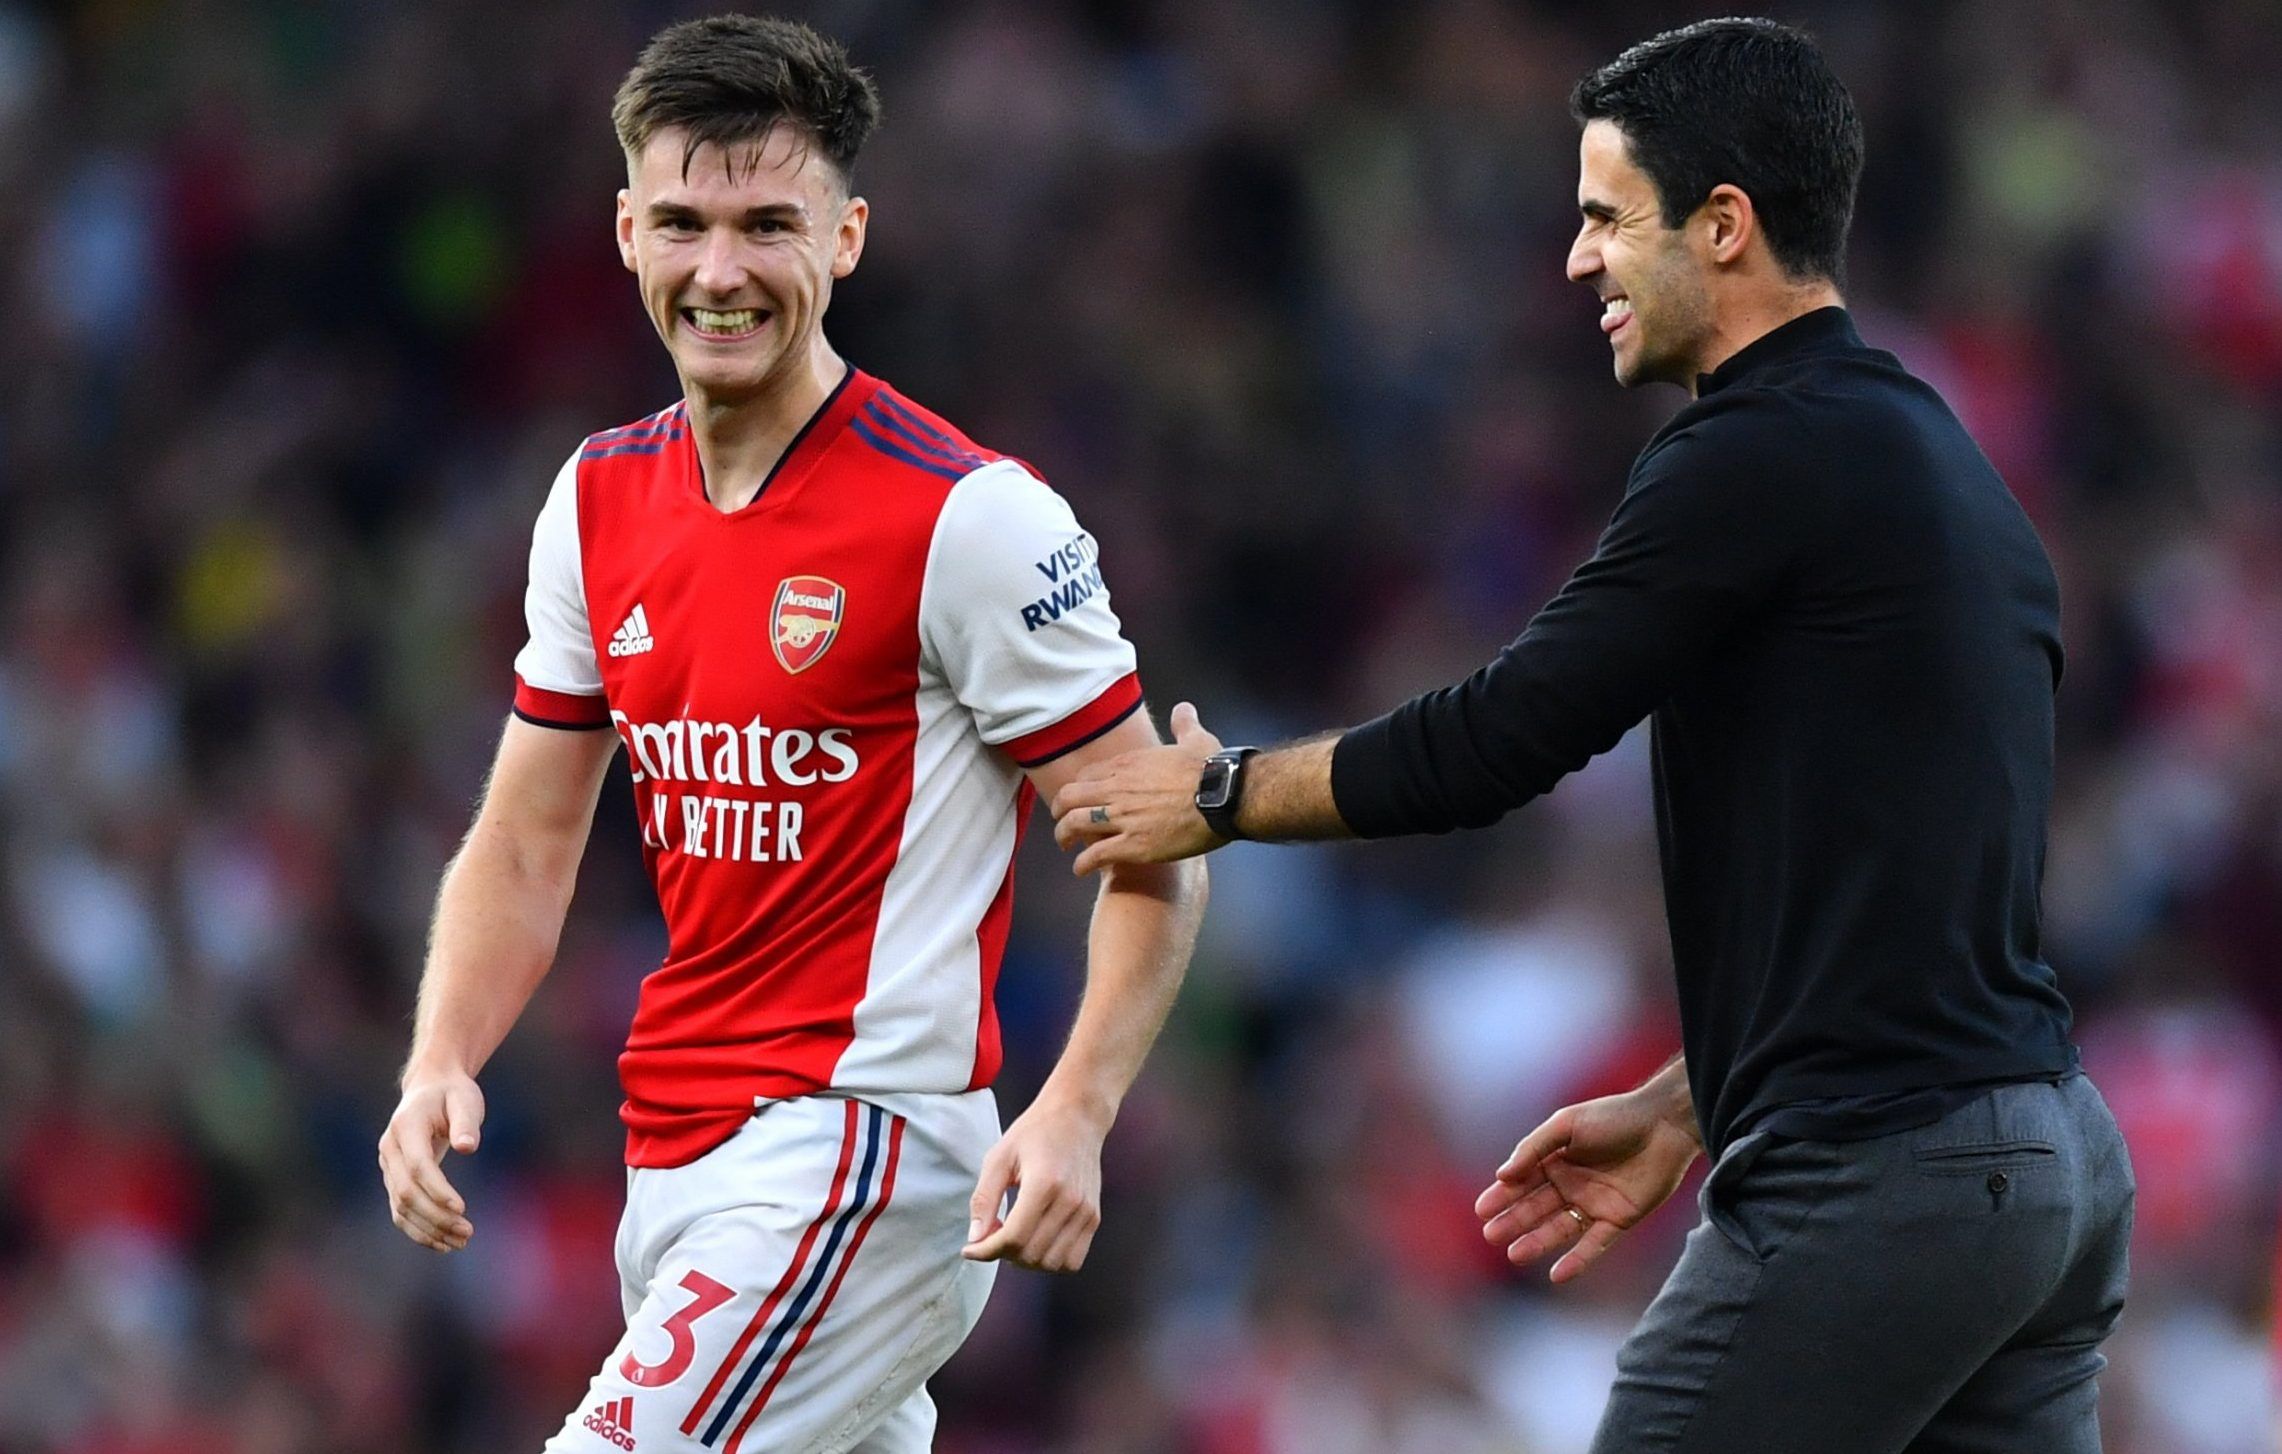 Arsenal defender Kieran Tierney celebrates north London derby win over Spurs with manager Mikel Arteta